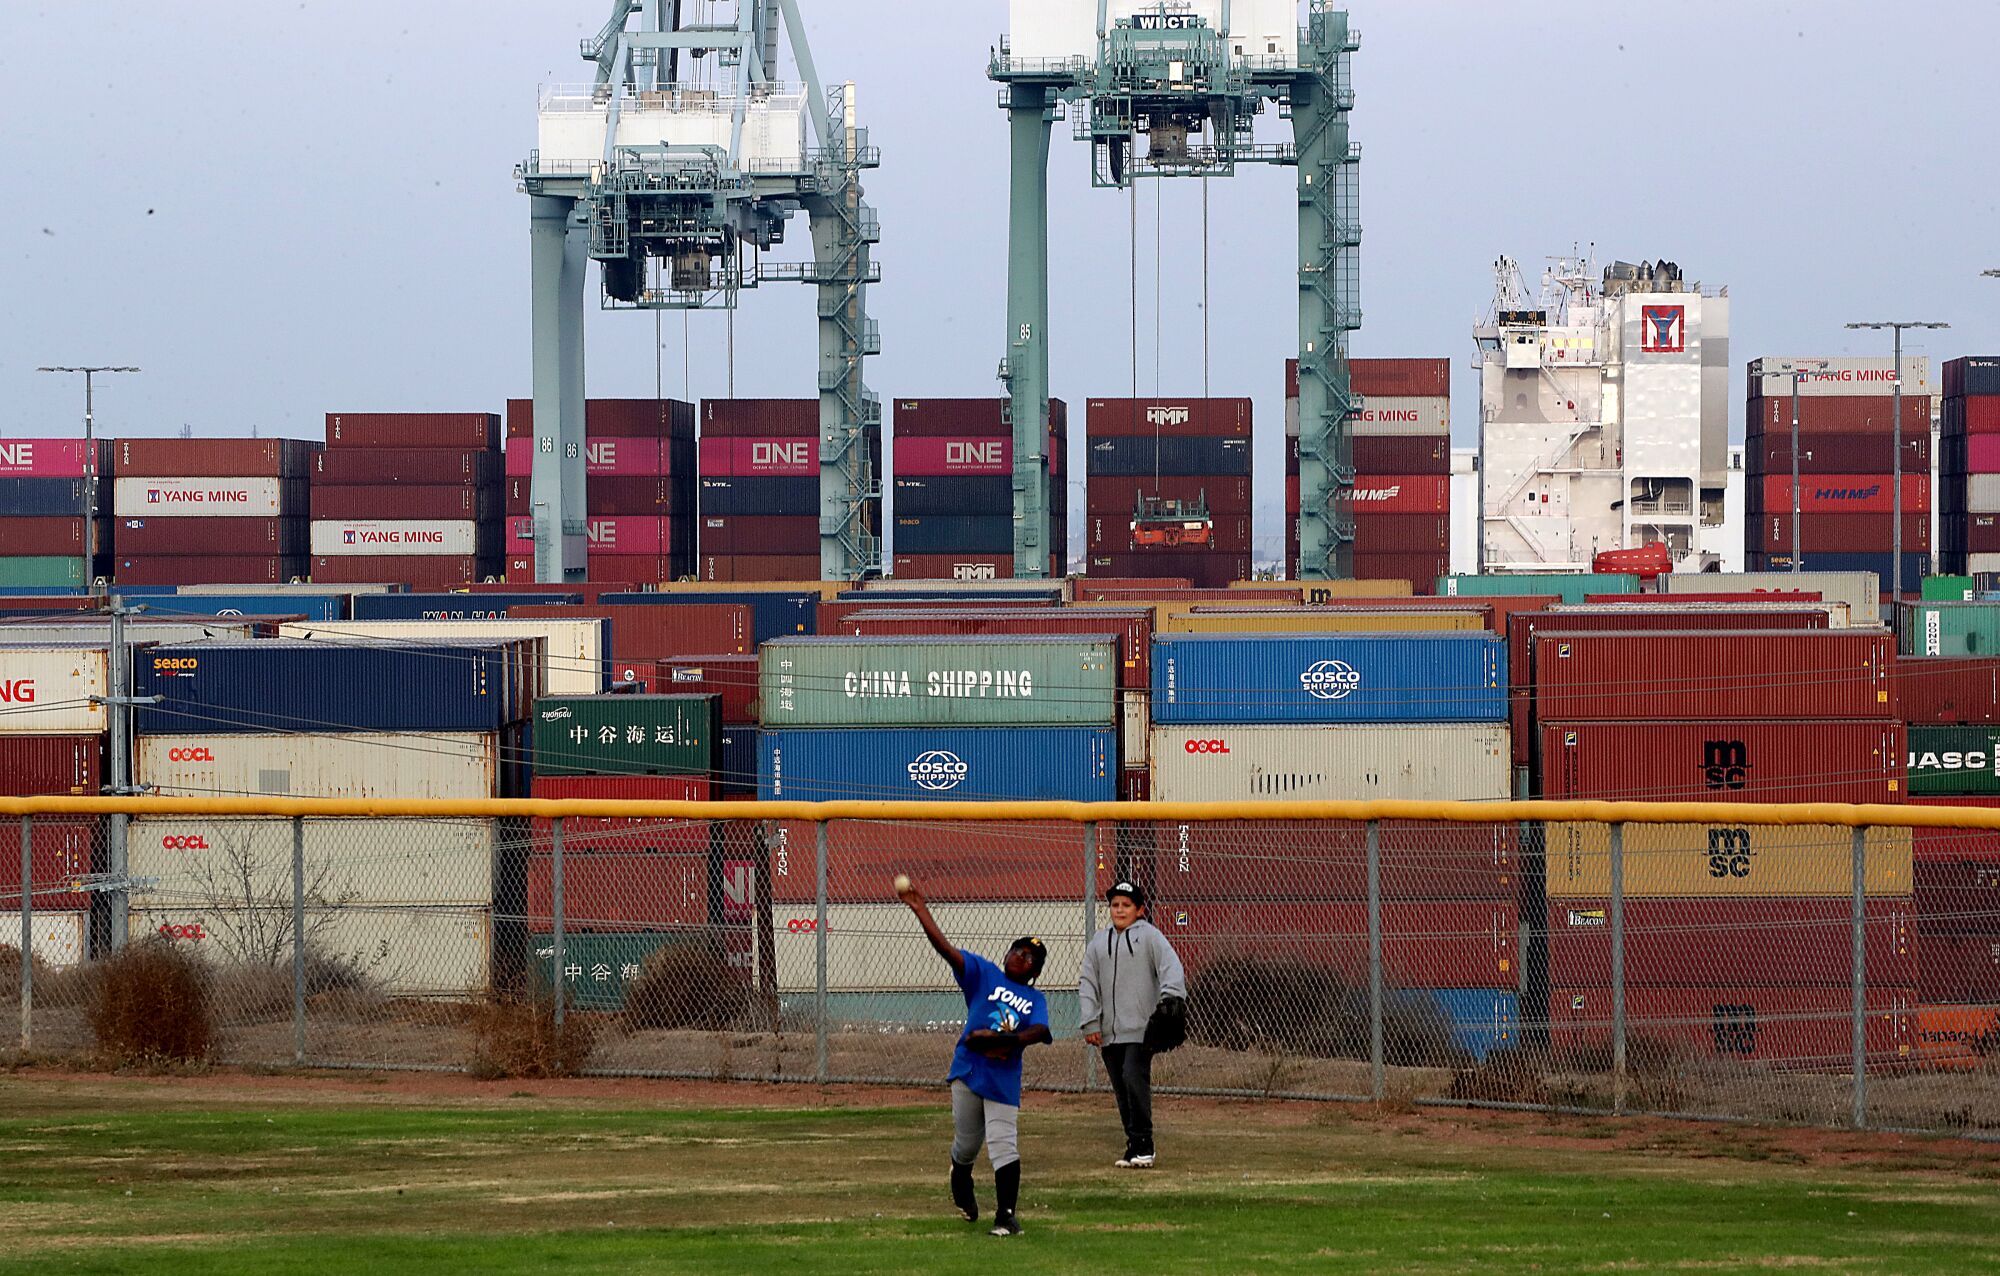 Kids play on a Little League baseball field that overlooks the Port of Los Angeles in San Pedro.